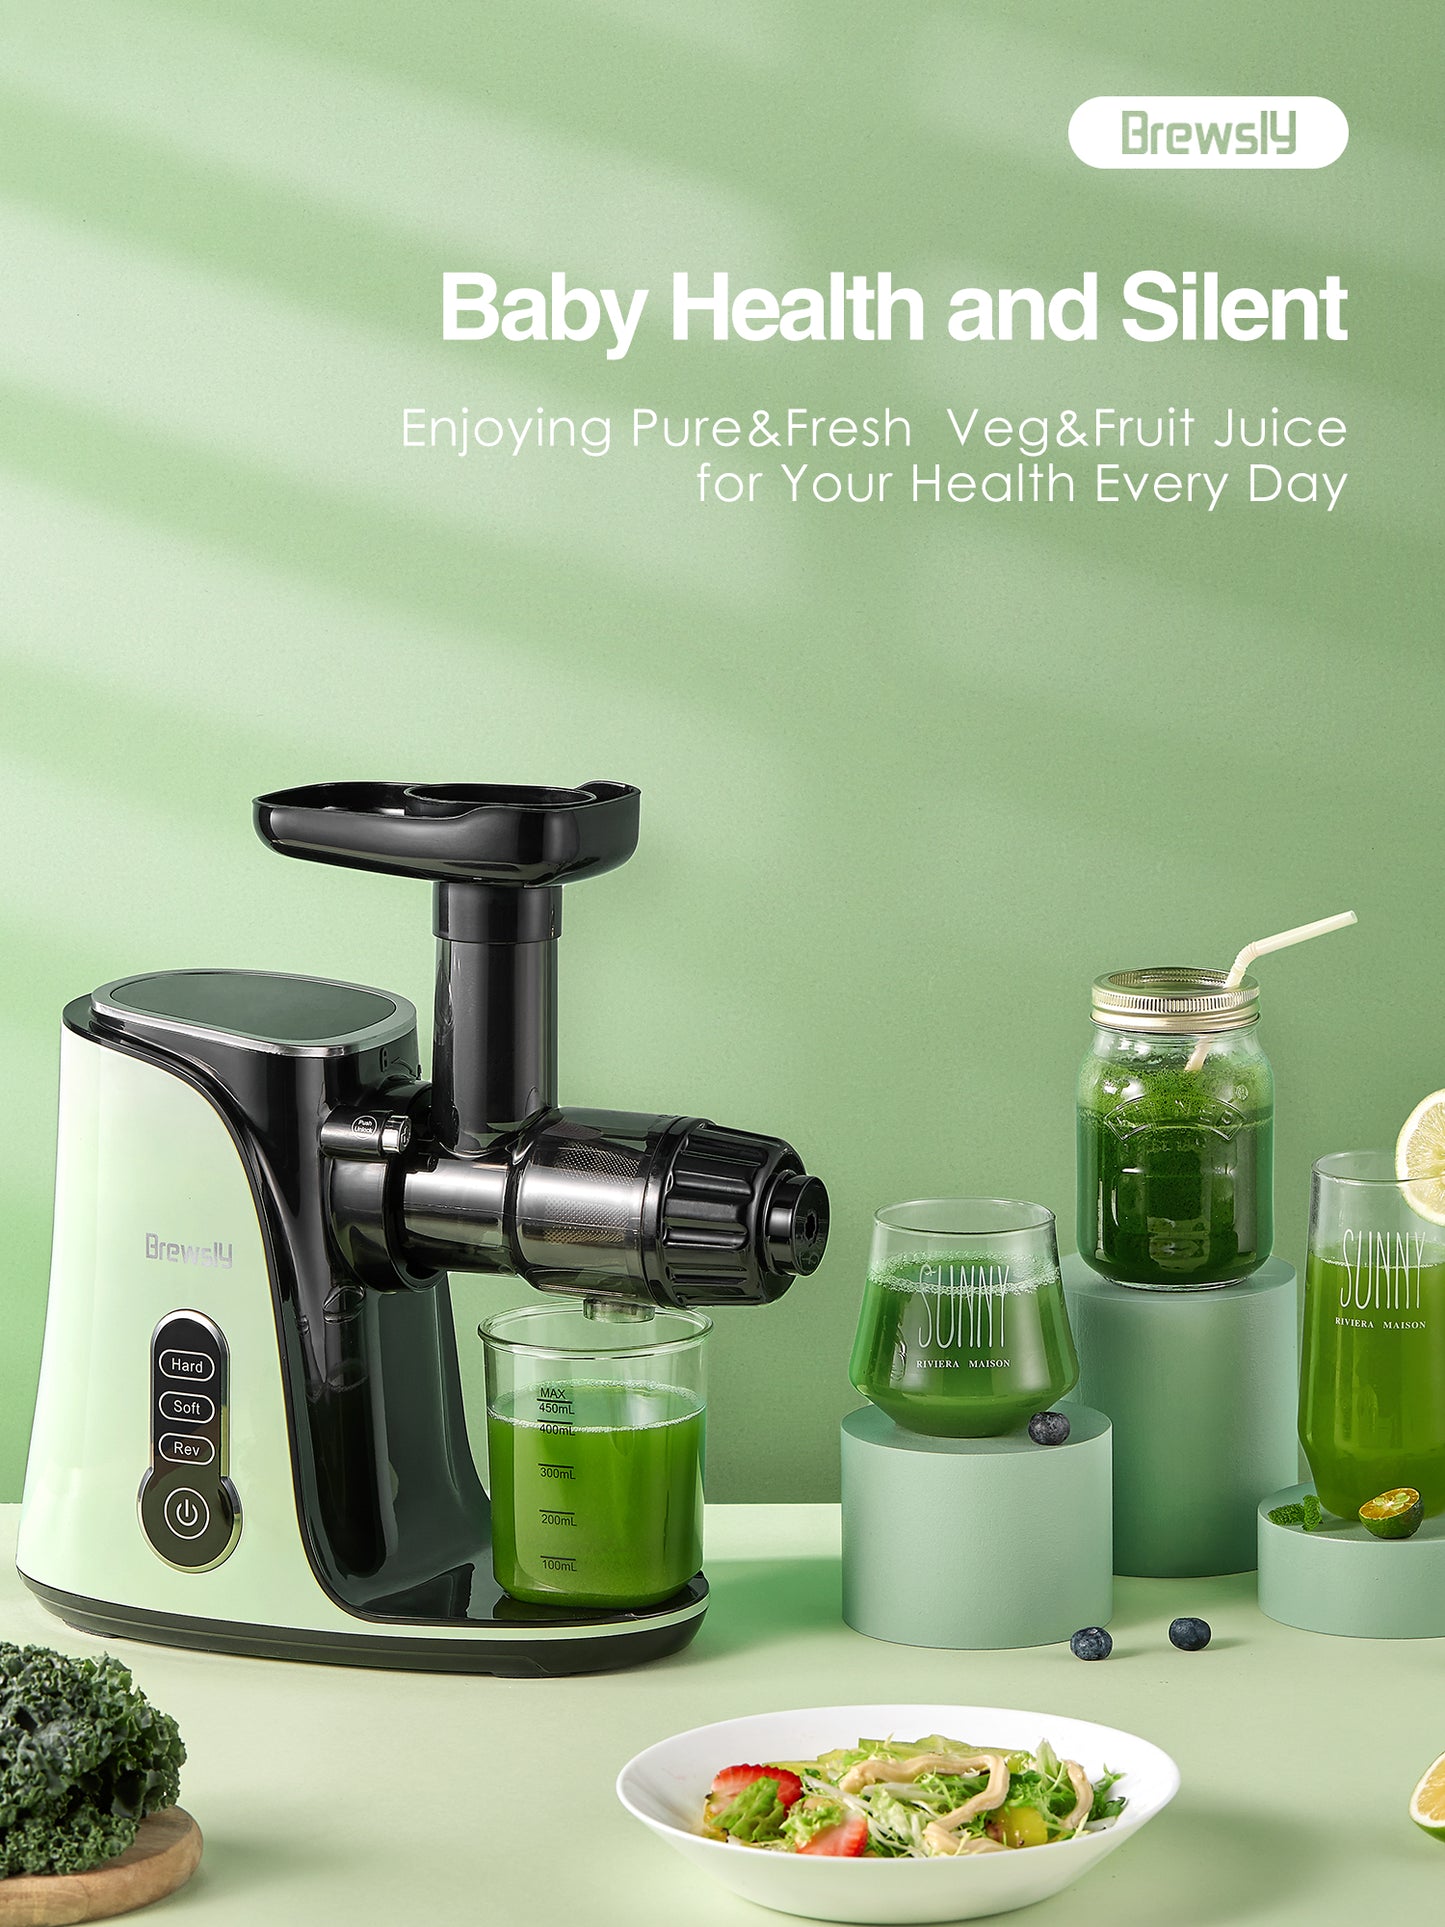 YIOU Juicer Machines, Cold Press Slow Masticating Juicer Easy to Clean with 3 Modes Vegetable and Fruit Juicer Extractor BPA-Free High Hardness